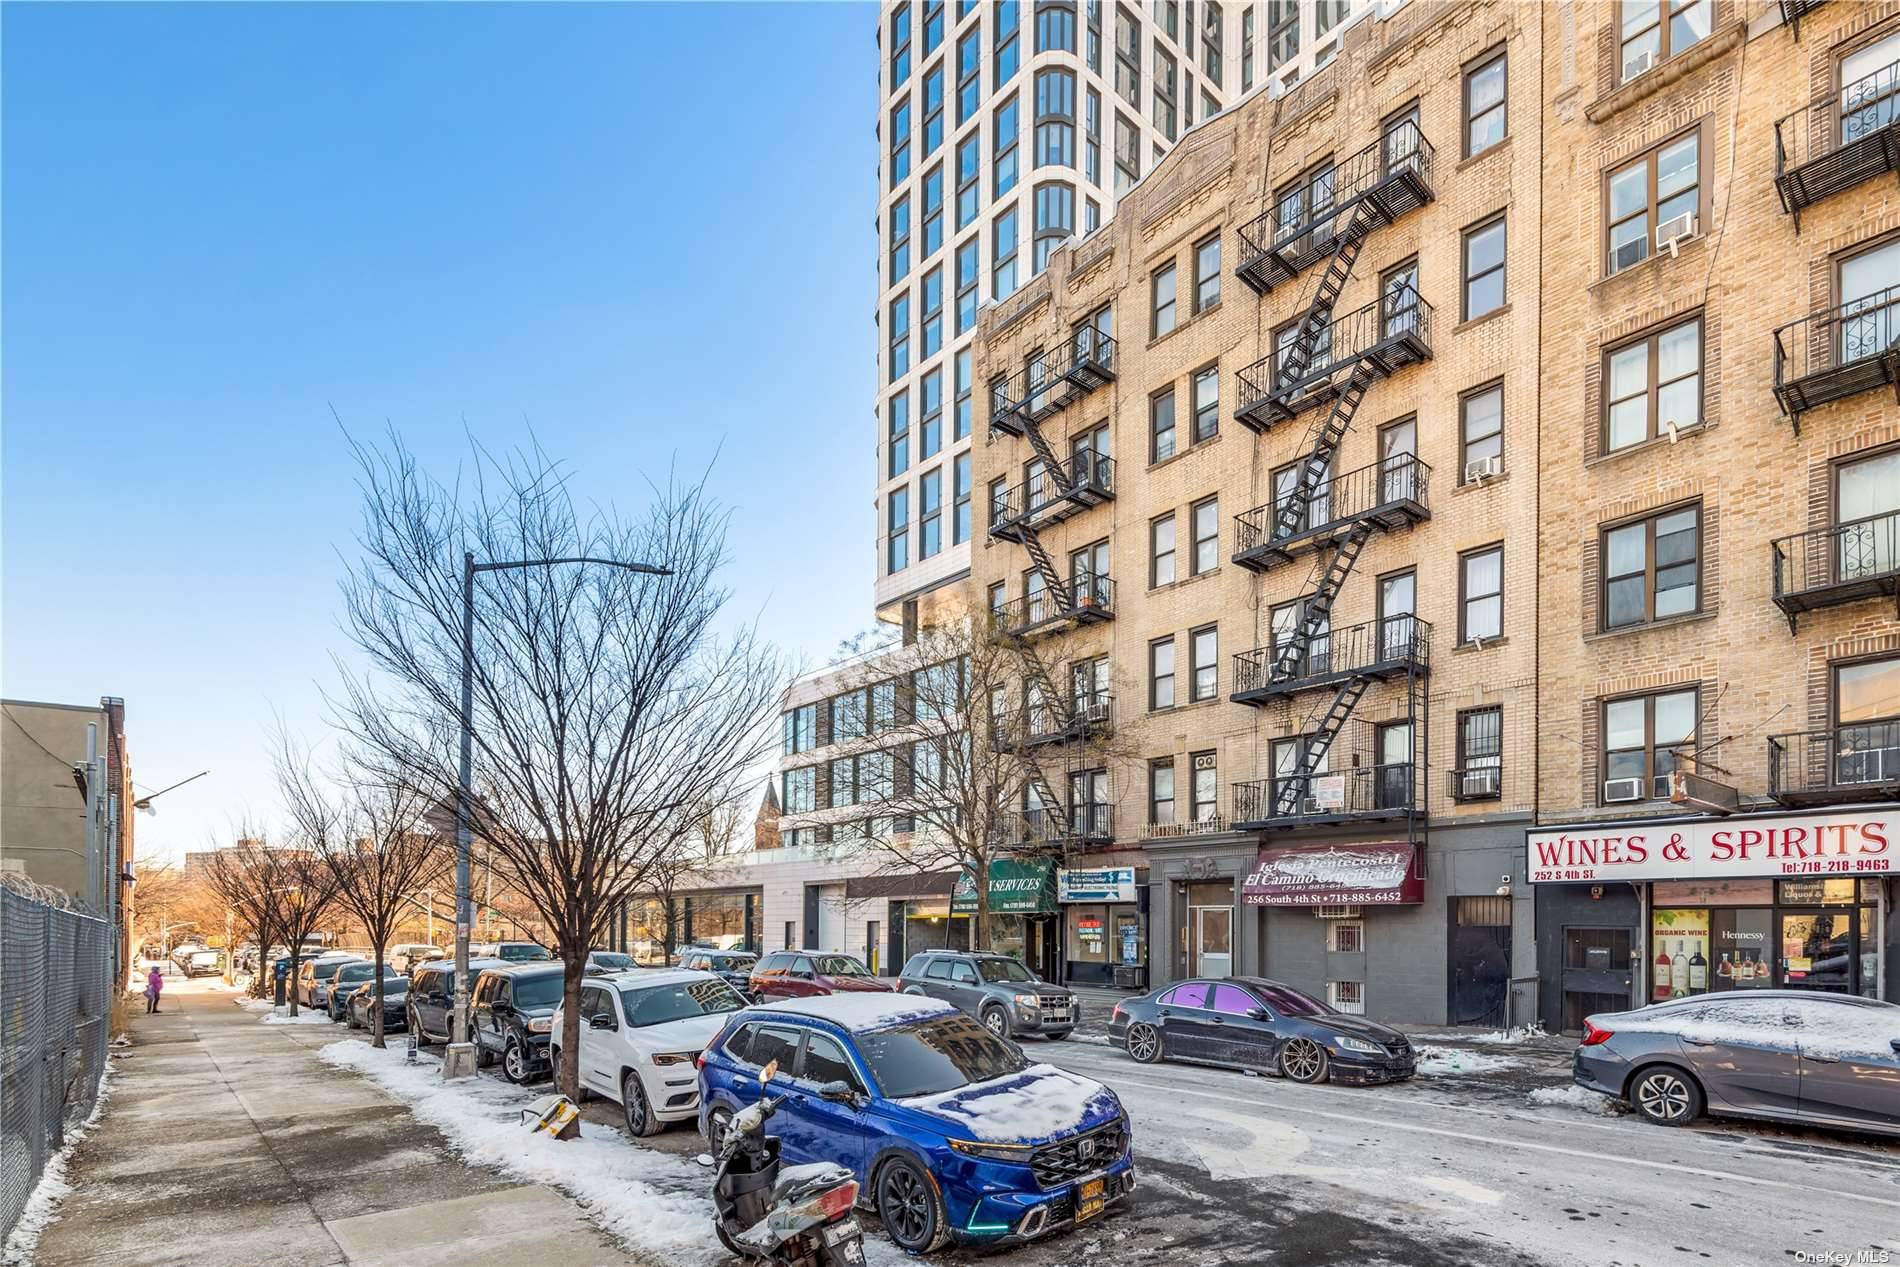 Prime Location ! ! ! In the heart of Williamsburg Brooklyn and literally next to all including public transportation.